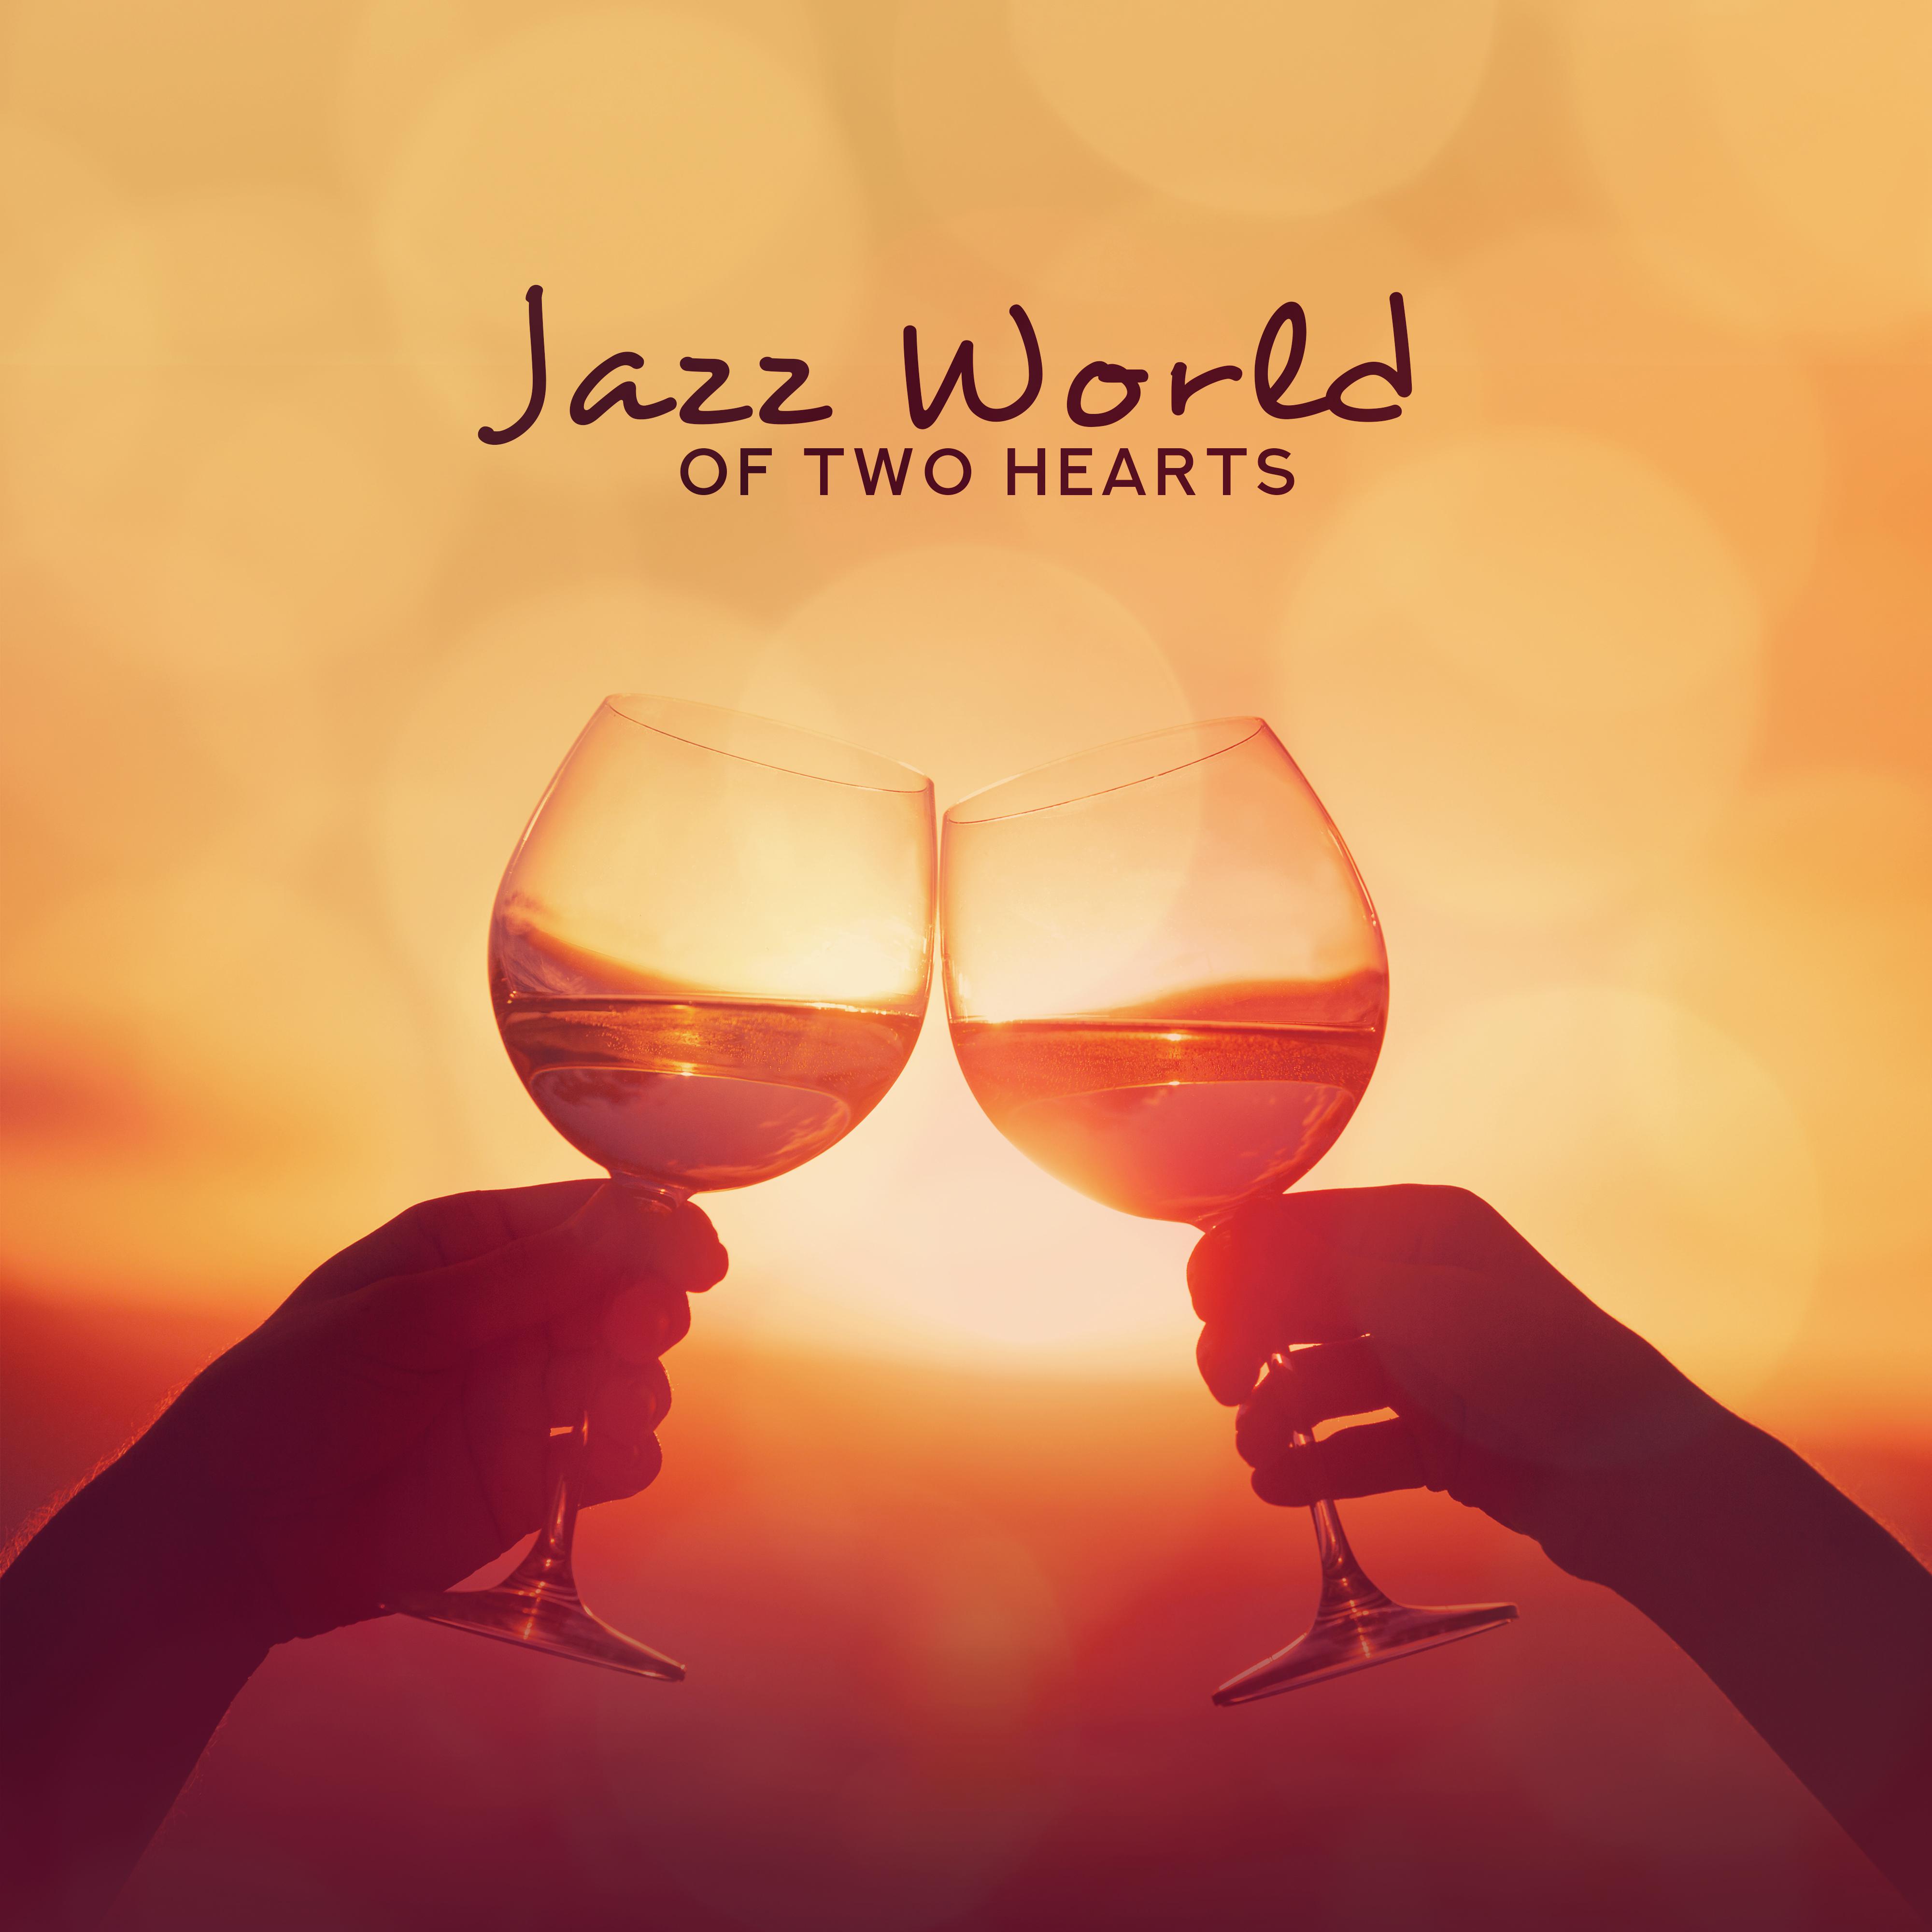 Jazz World of Two Hearts: Romantic Instrumental Smooth Jazz 2019 Music, Perfect Couple Dinner Background Melodies, Romantic Time Together